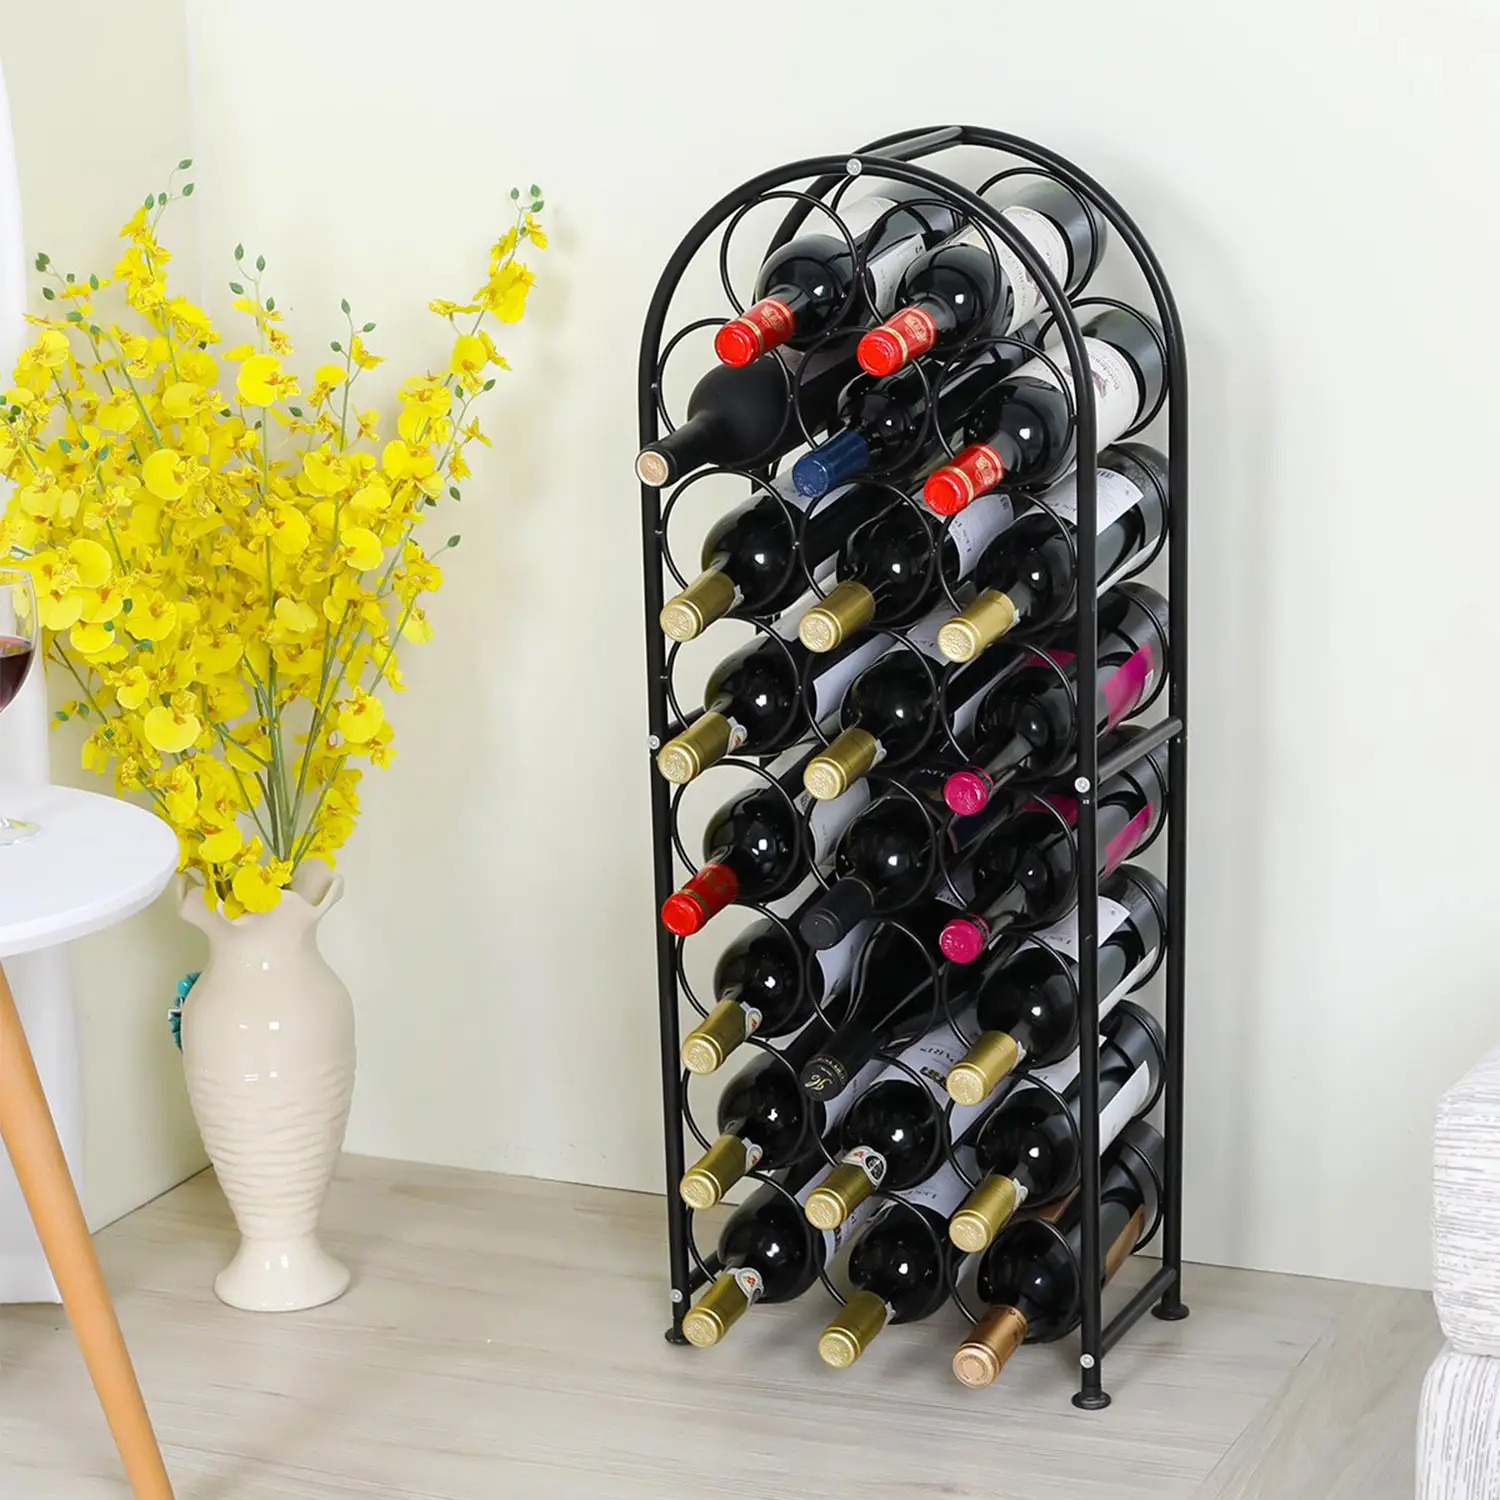 Professional Wrought Hanging Iron Tabletop Manufacturing Home kitchen decoration Countertop wine bottle holder display rack